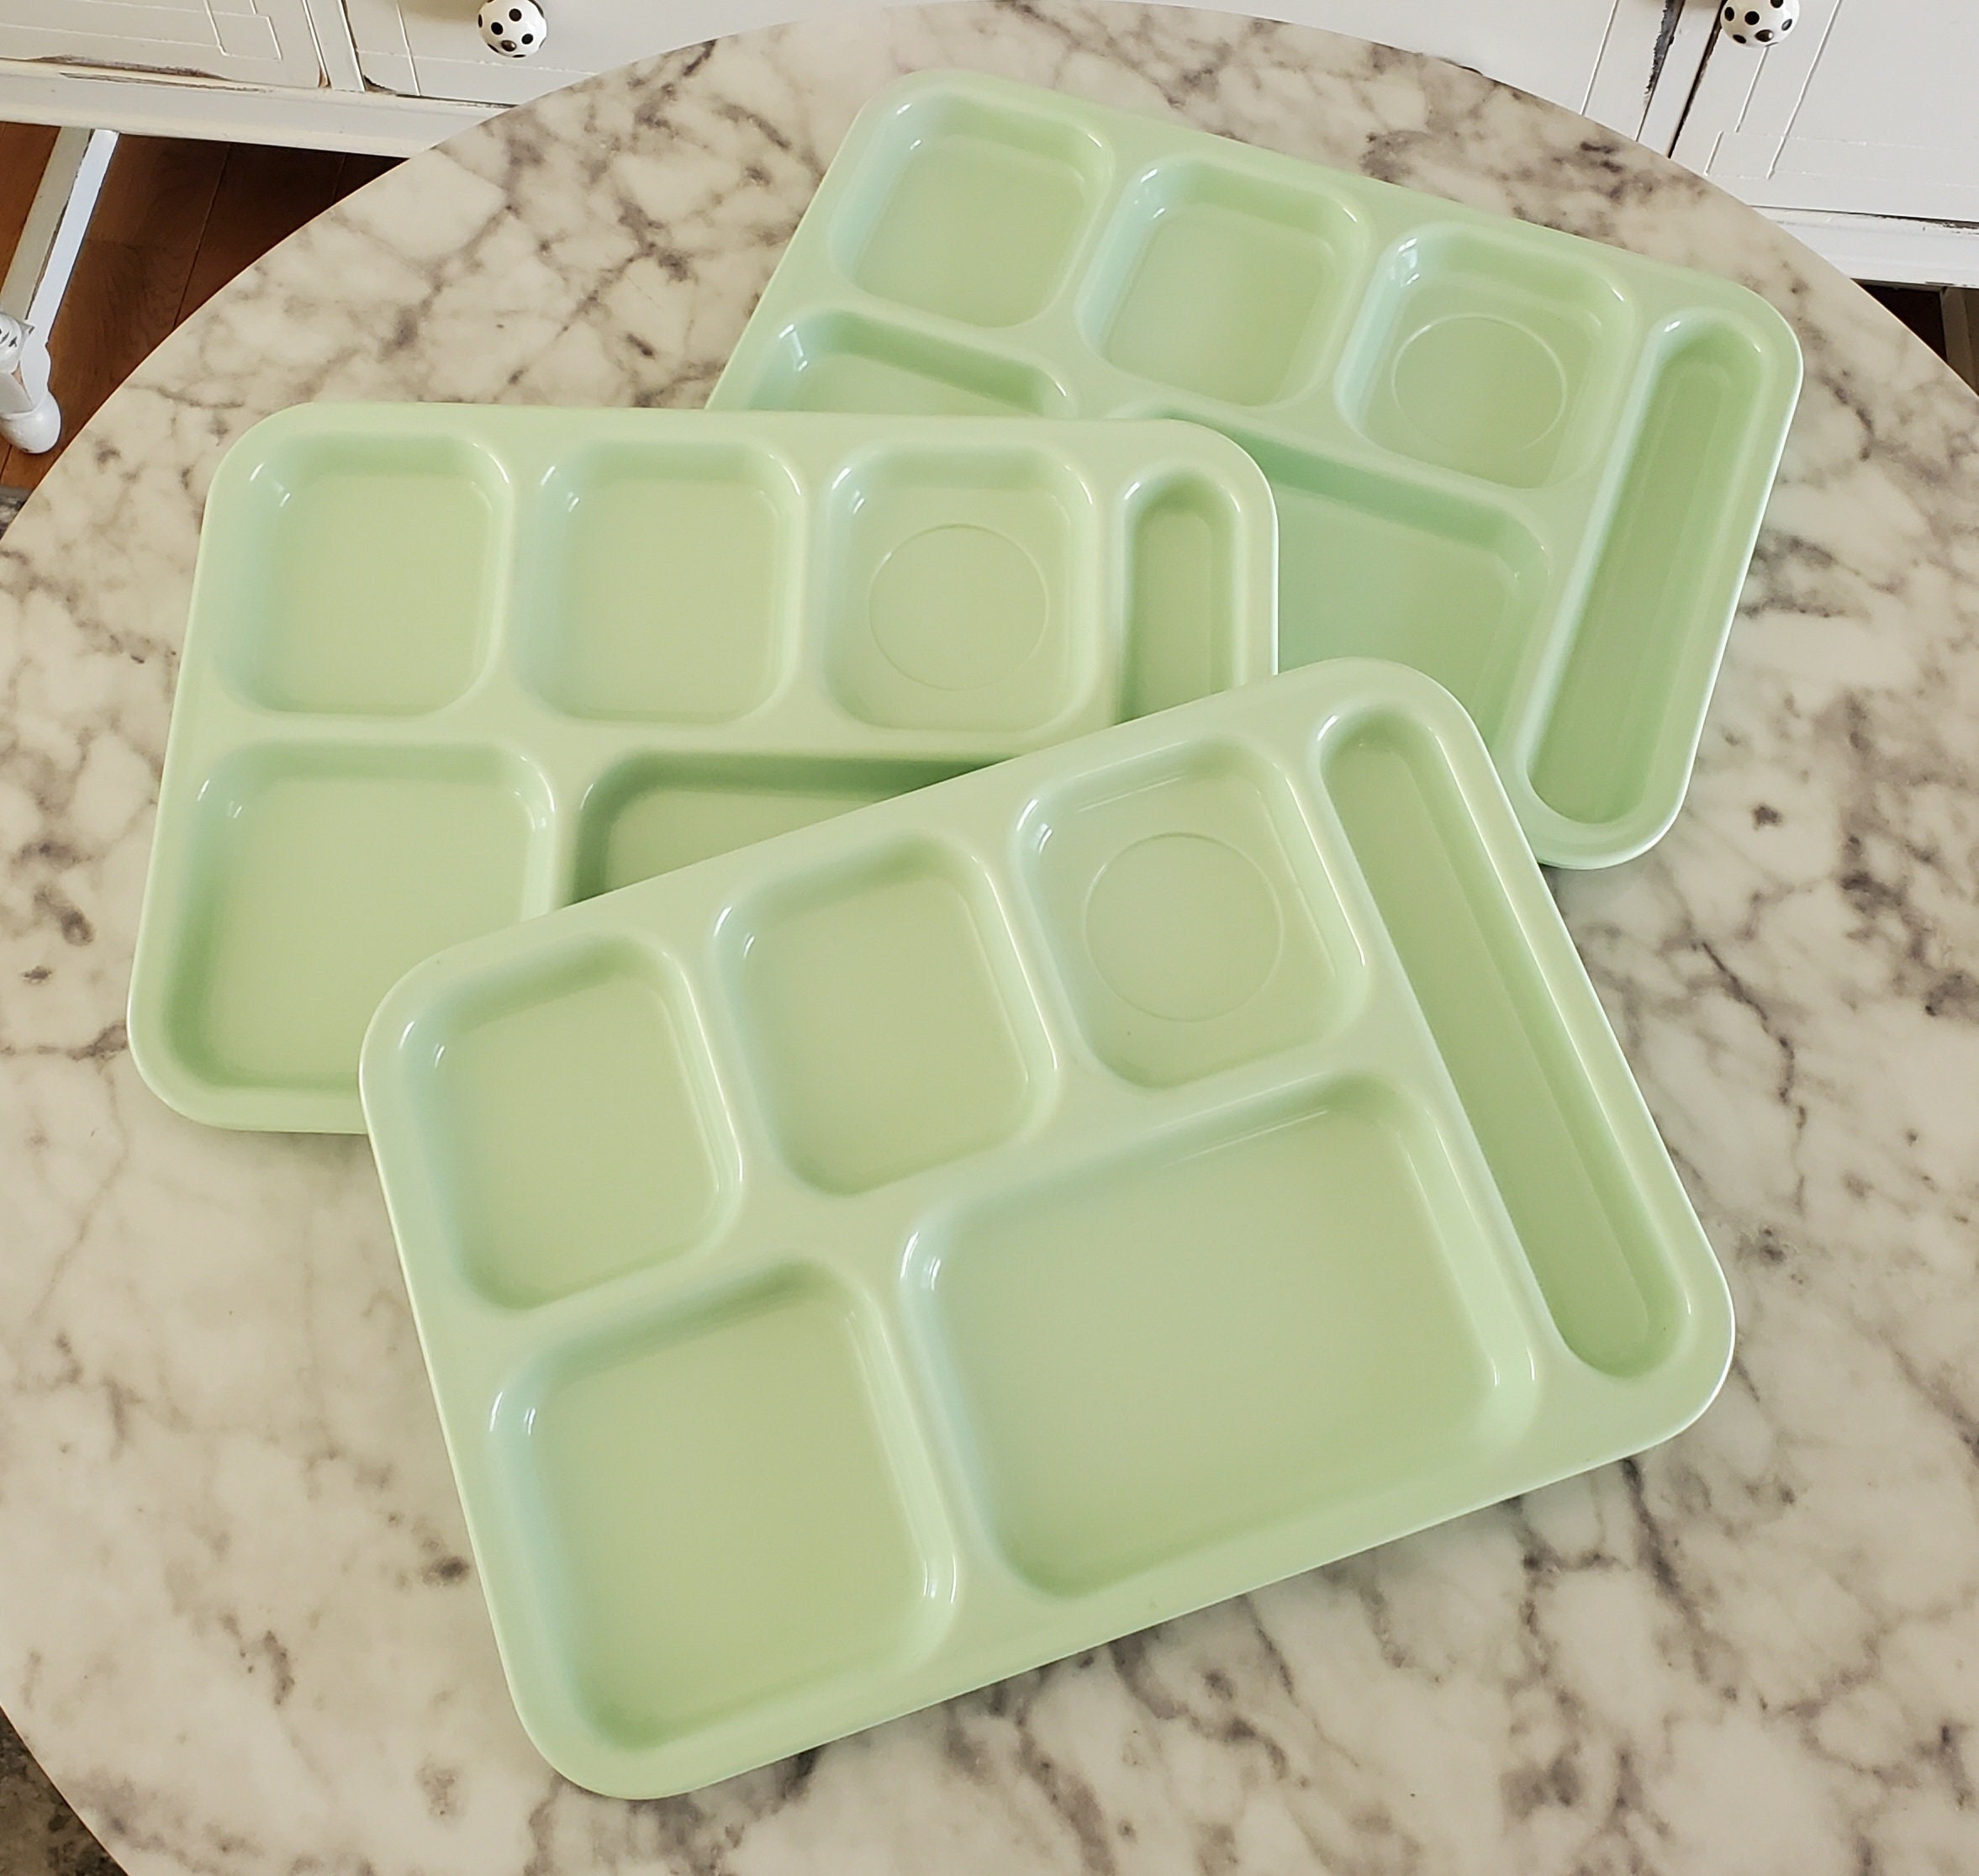 4 Vintage DALLAS WARE Mint Green Cafeteria Lunch Trays w/ 6